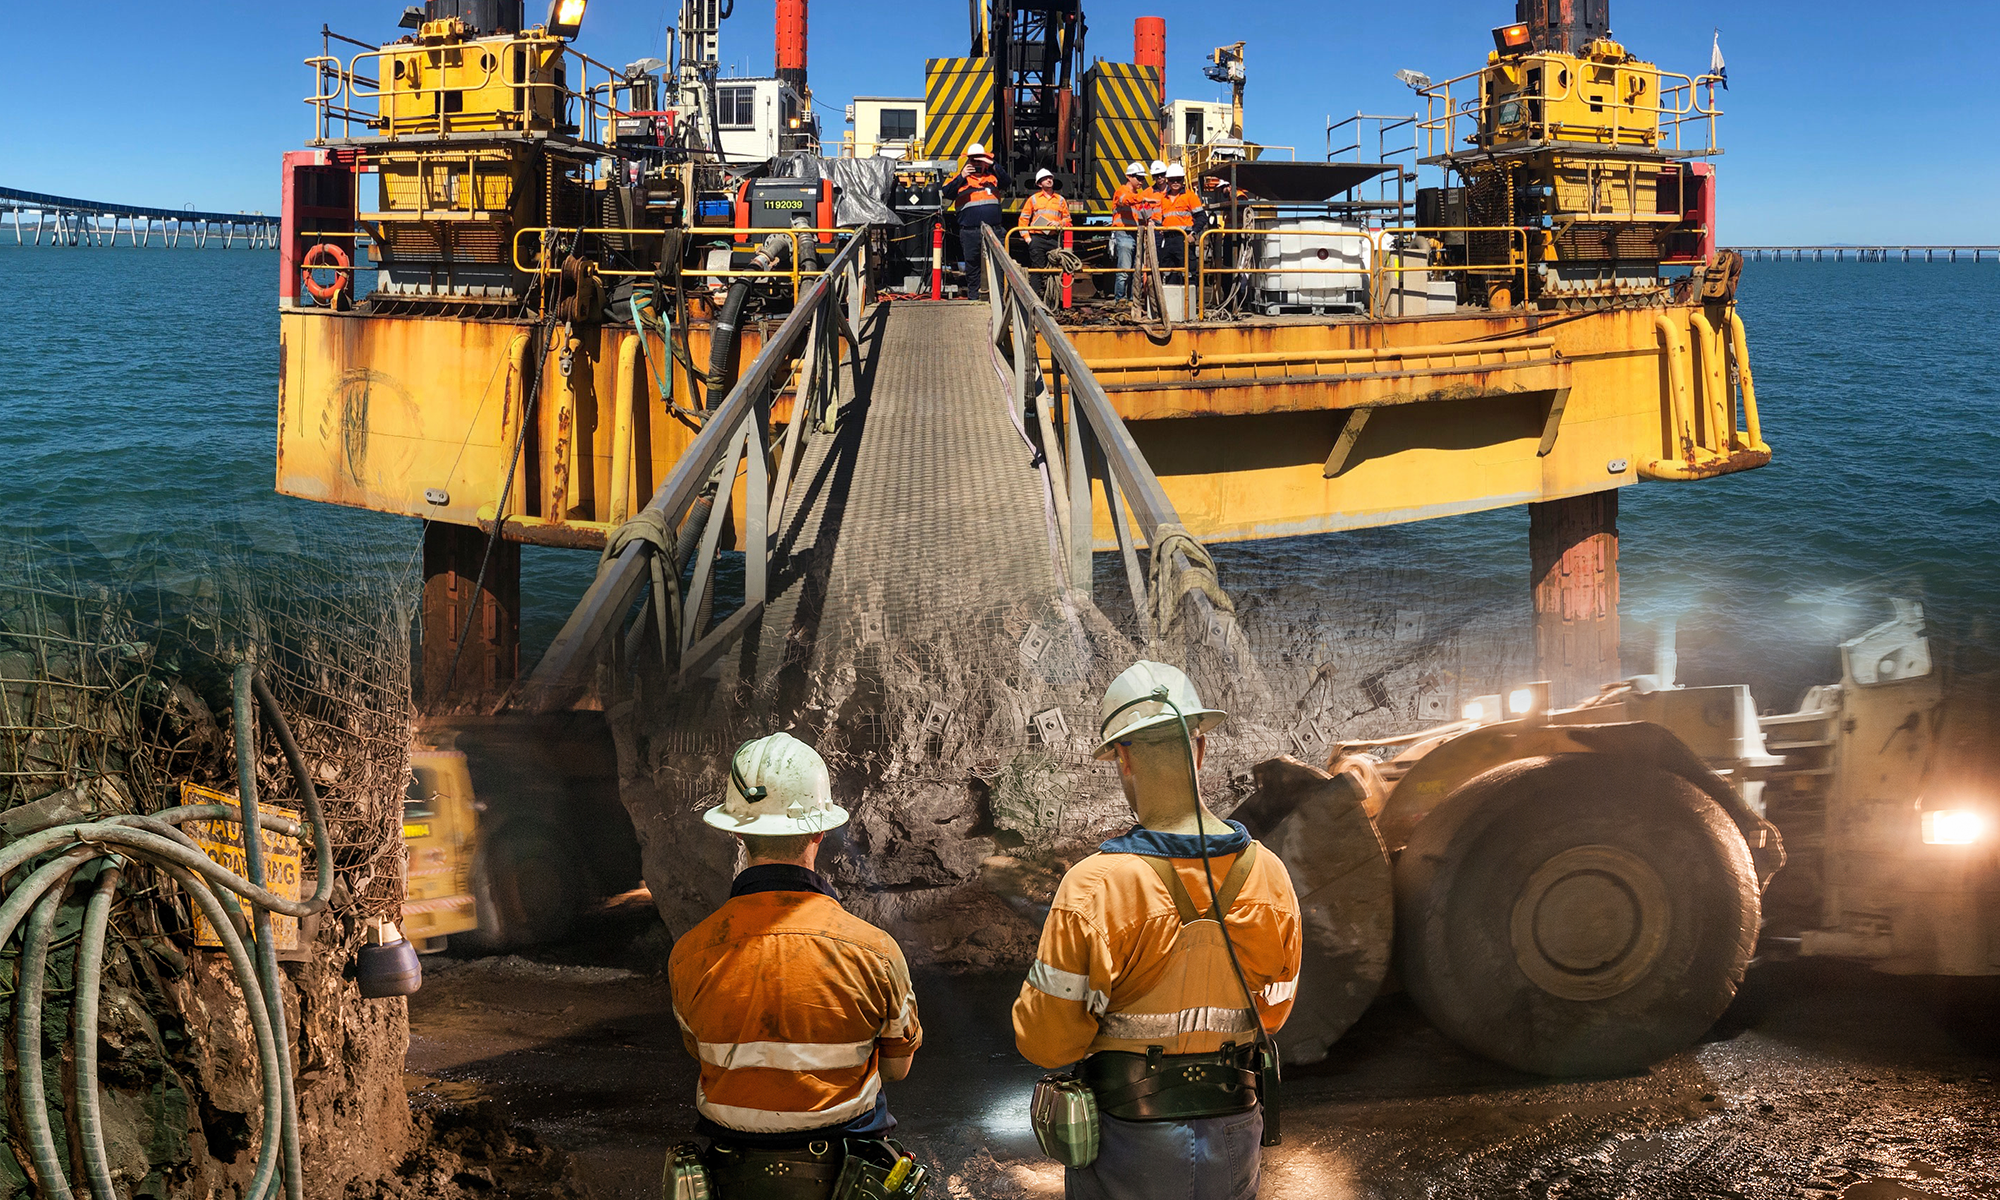 Our team supporting Qld Ports and Underground Mines